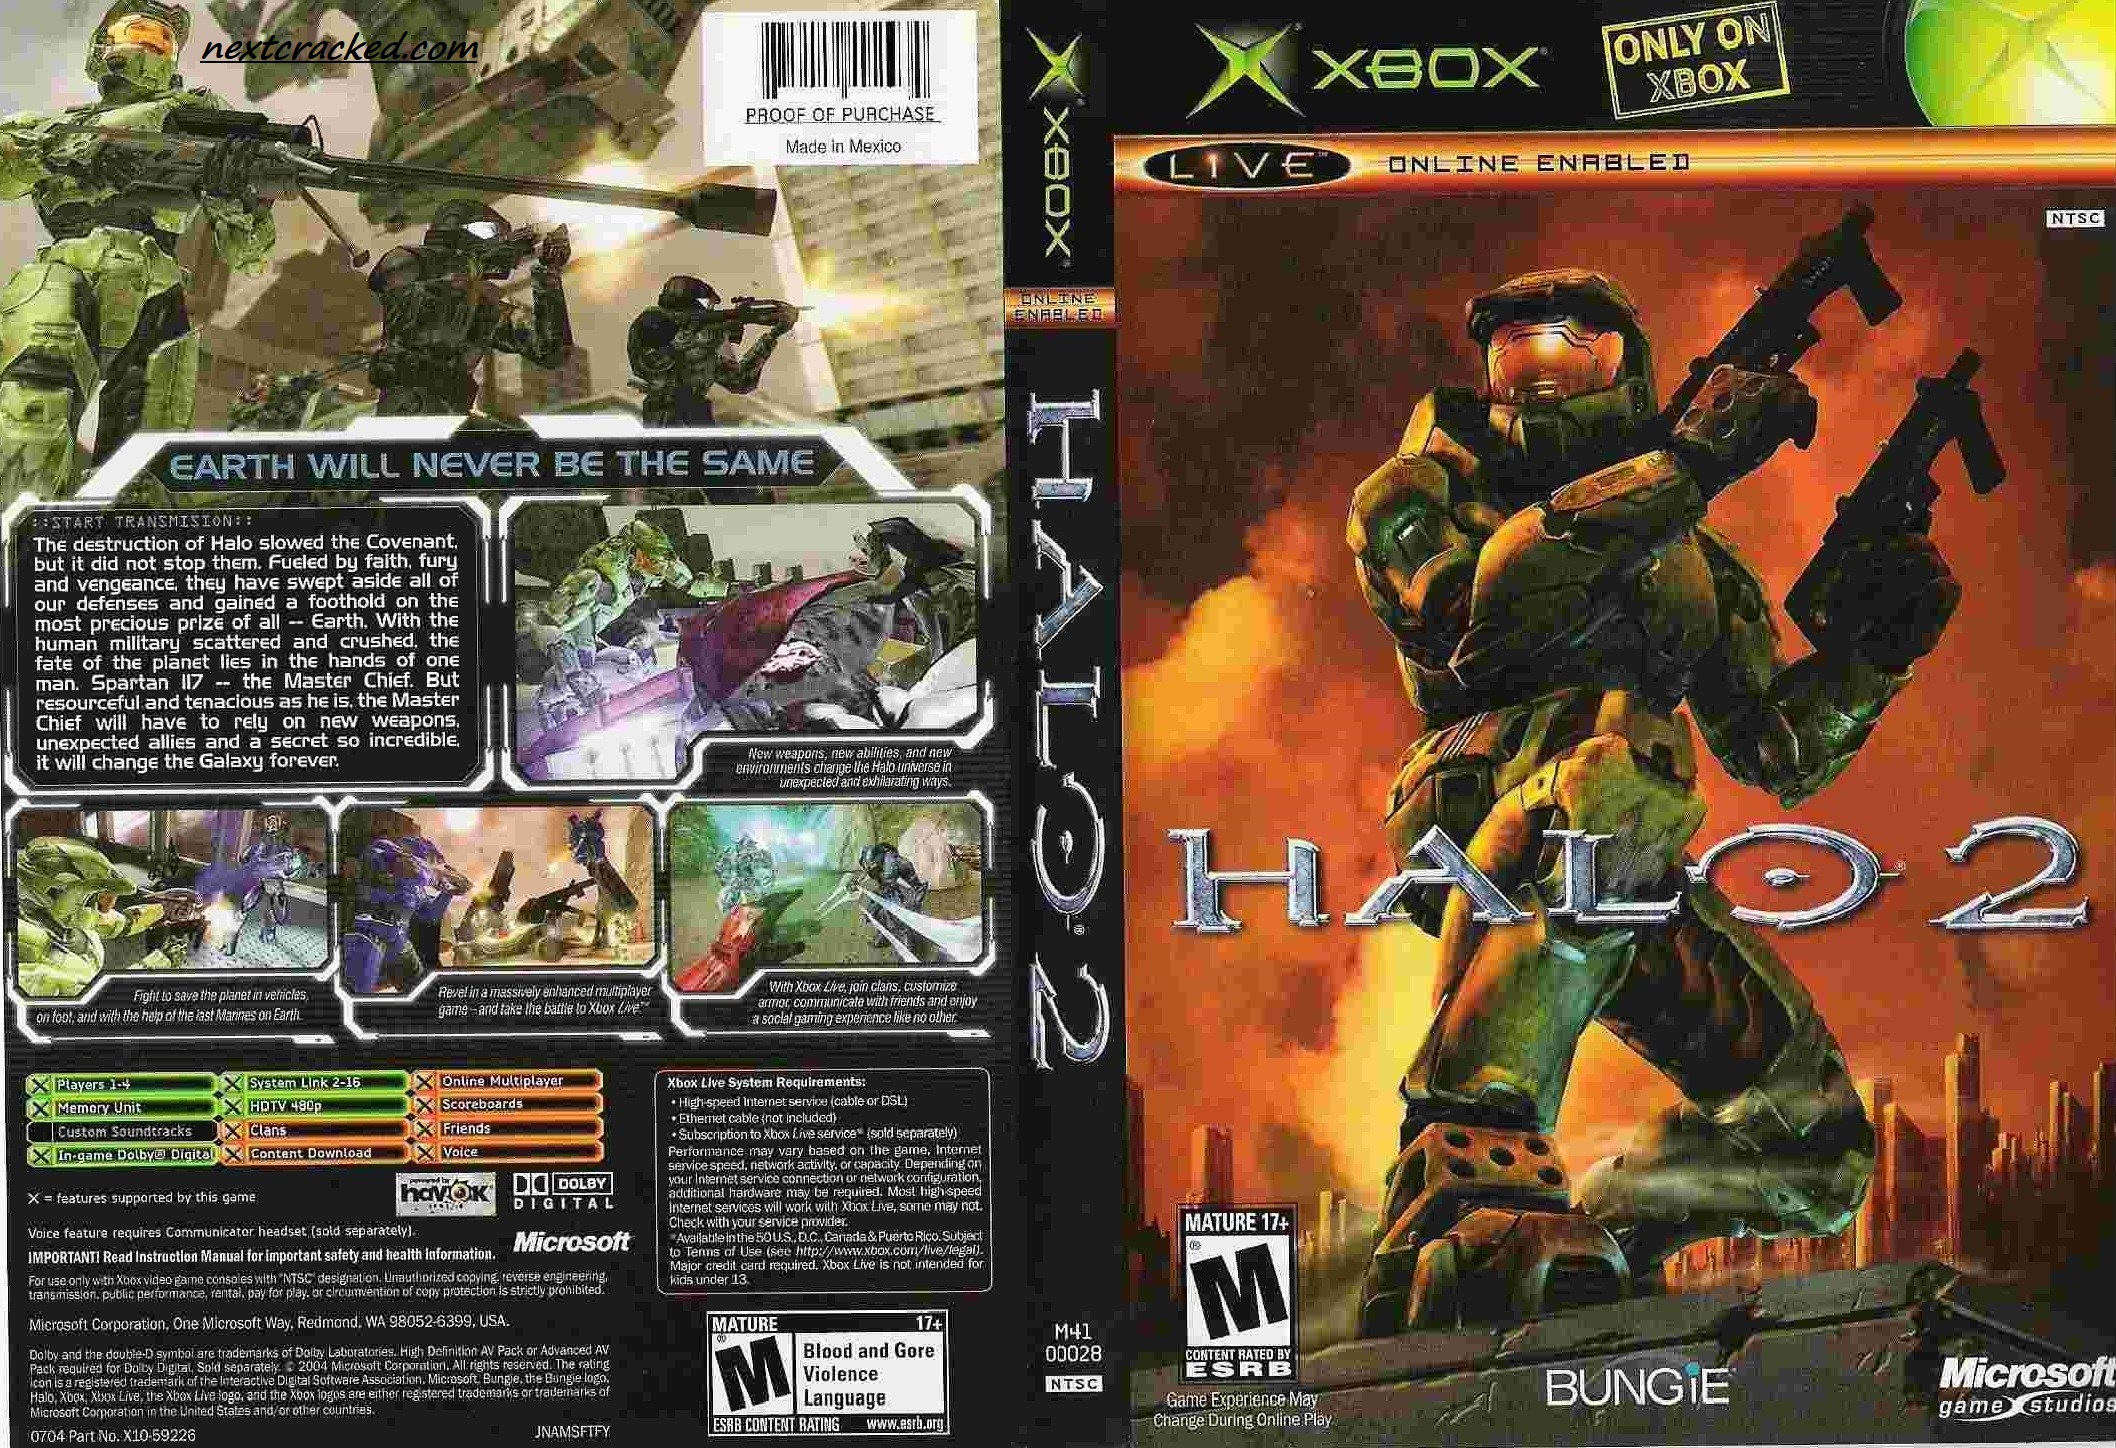 free halo 2 download